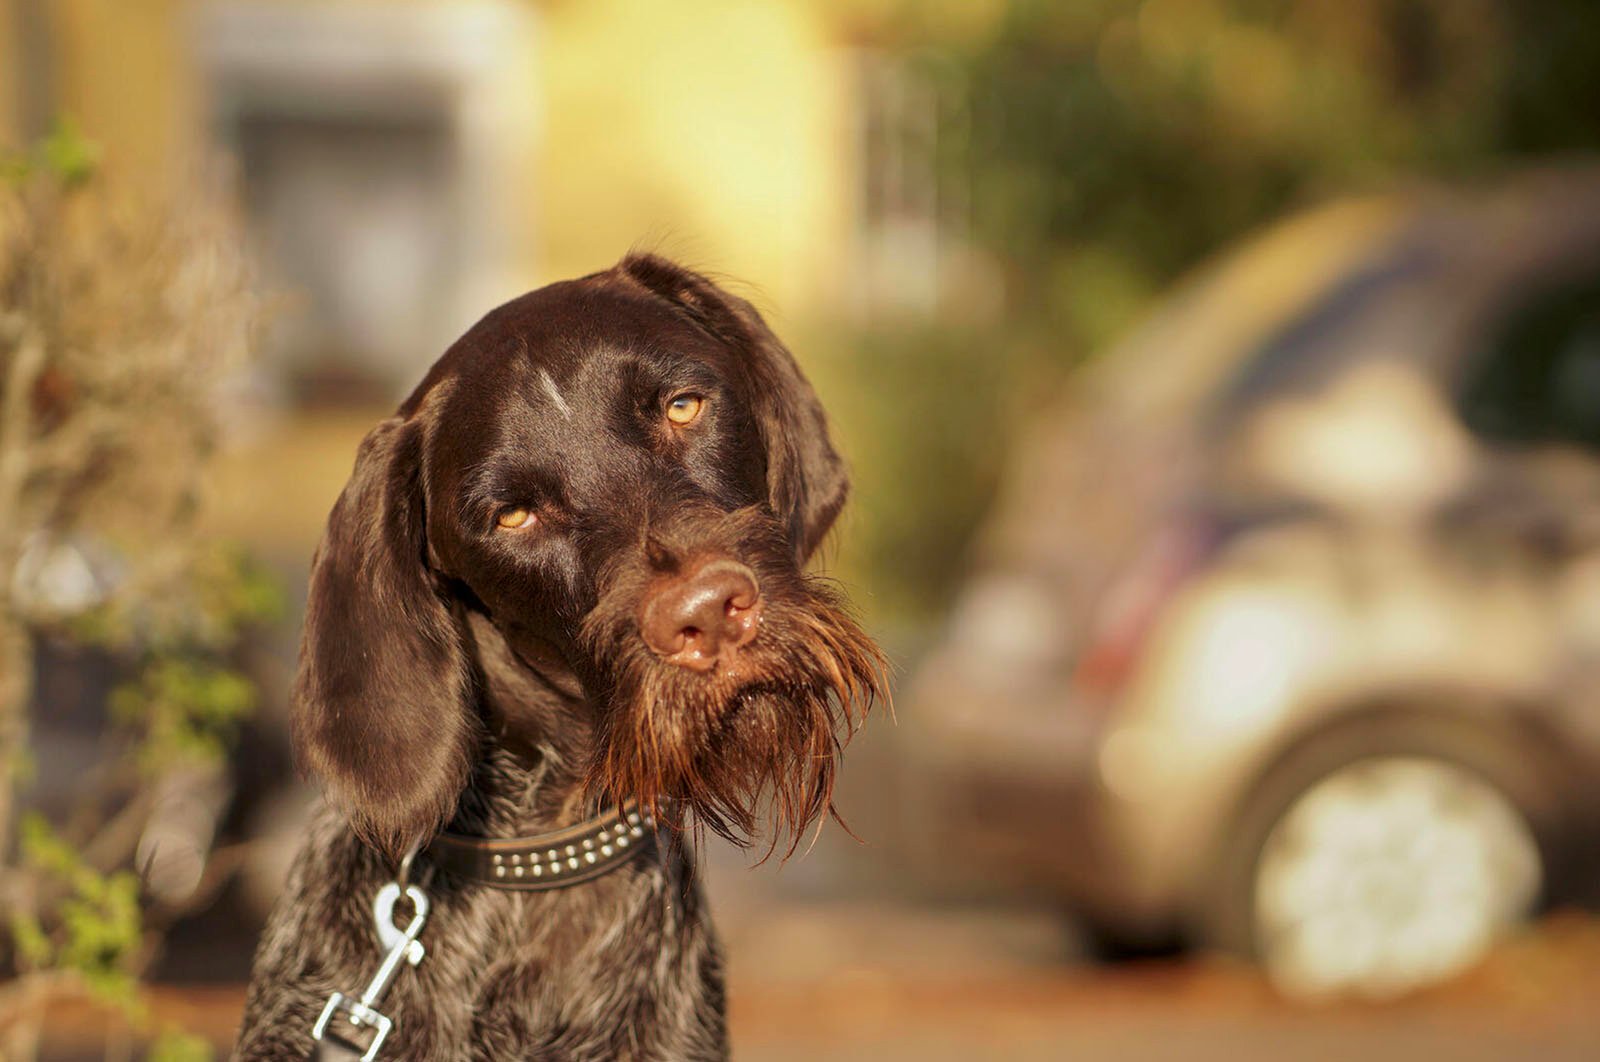 A brown dog with a shiny coat and droopy ears looks thoughtfully at the camera, a blurred car and house in the background, conveying a warm, serene setting.